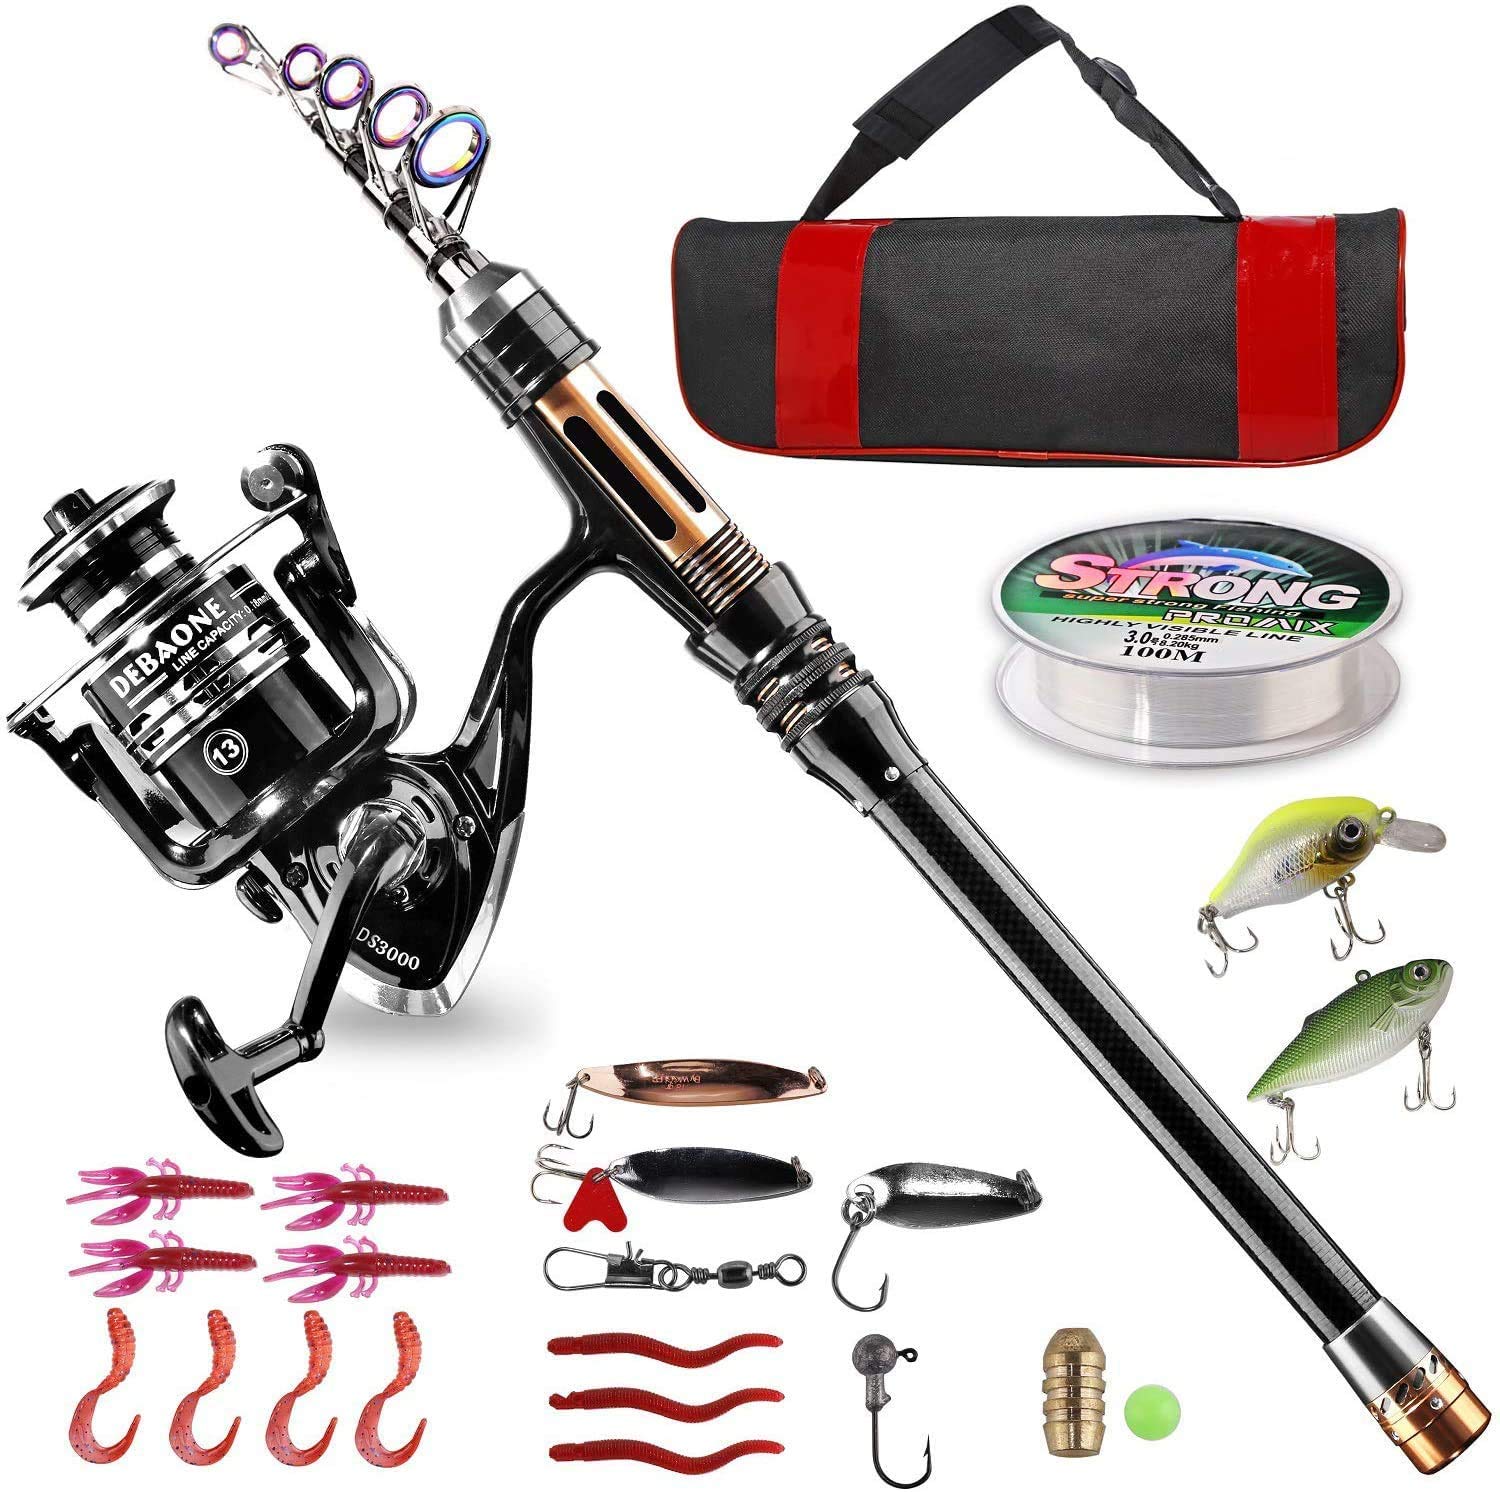 Fishing Rods for Sea Fishing, Telescopic Fishing Rod And Reel